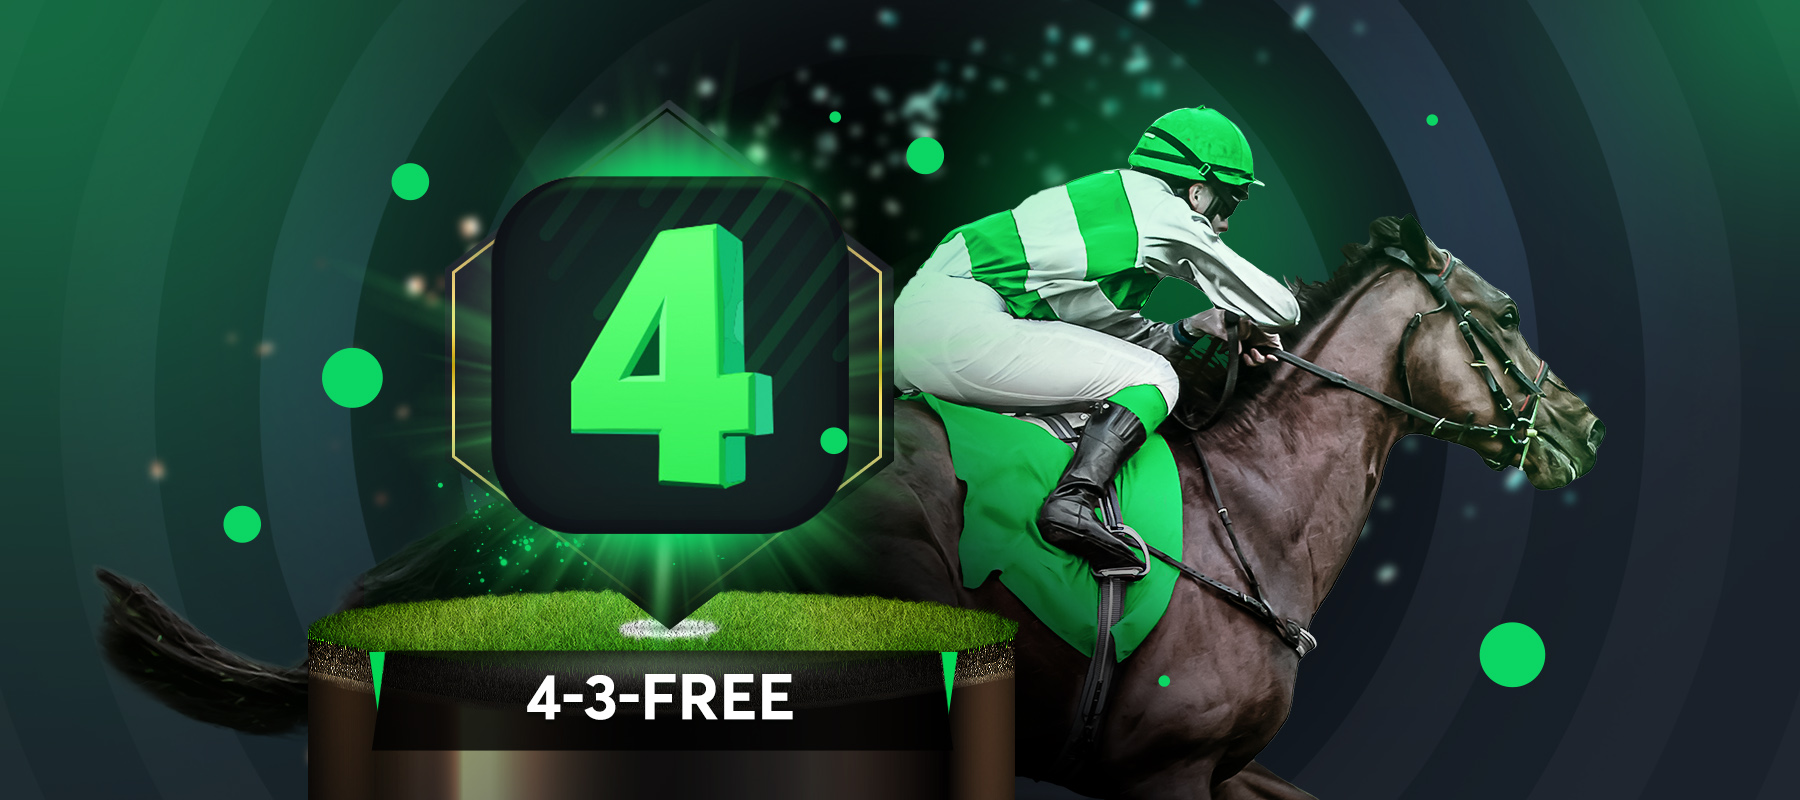 4-3-Free for horse racing is available exclusively in Japan!